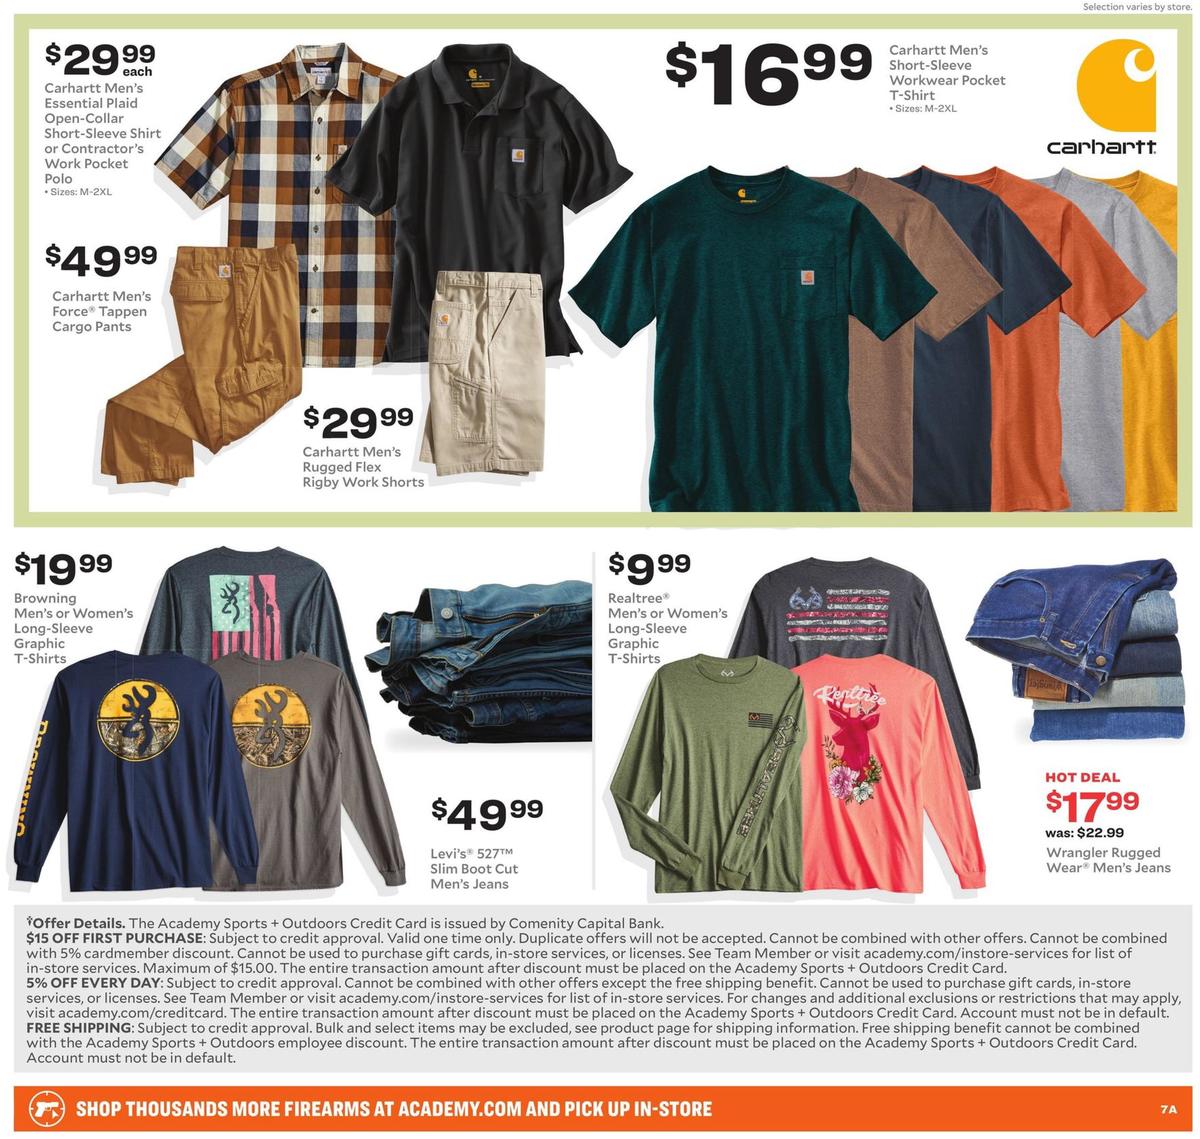 Academy Sports + Outdoors Gear Up for the Hunt Weekly Ad from August 4